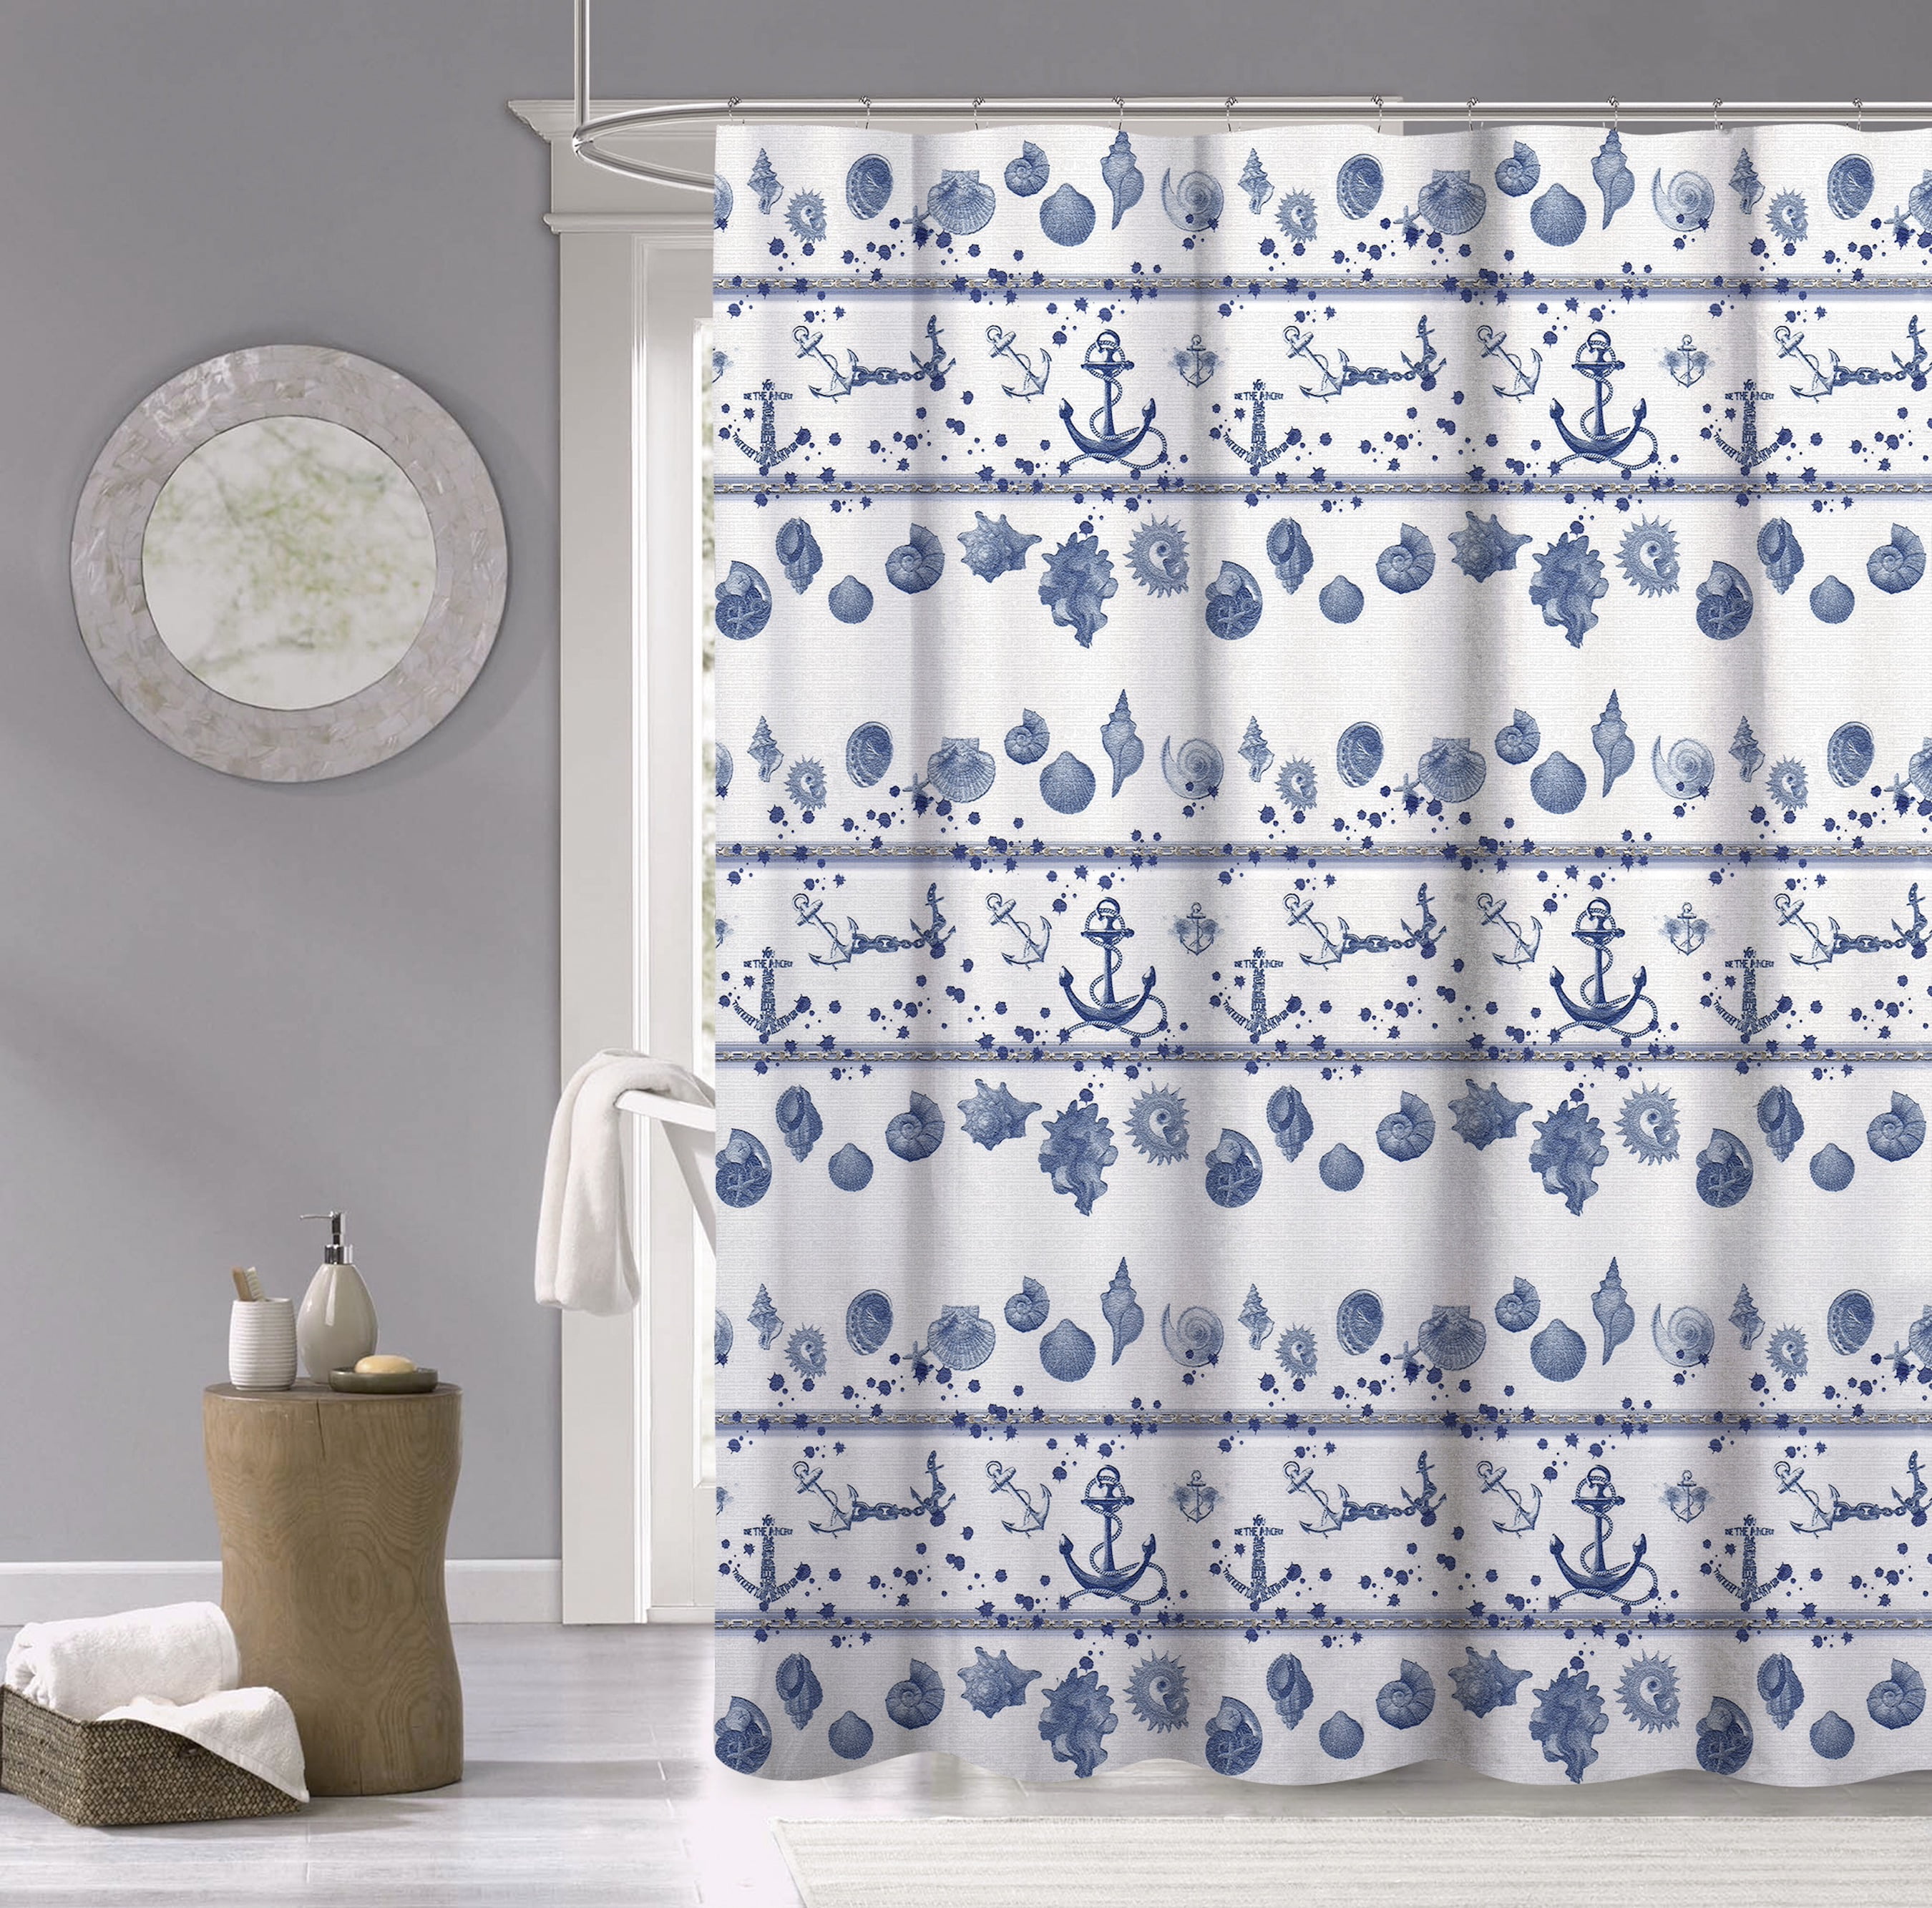 8Round BlueWhite Shower Curtain Tablecloth Curtain Weights Balloon Anchors 